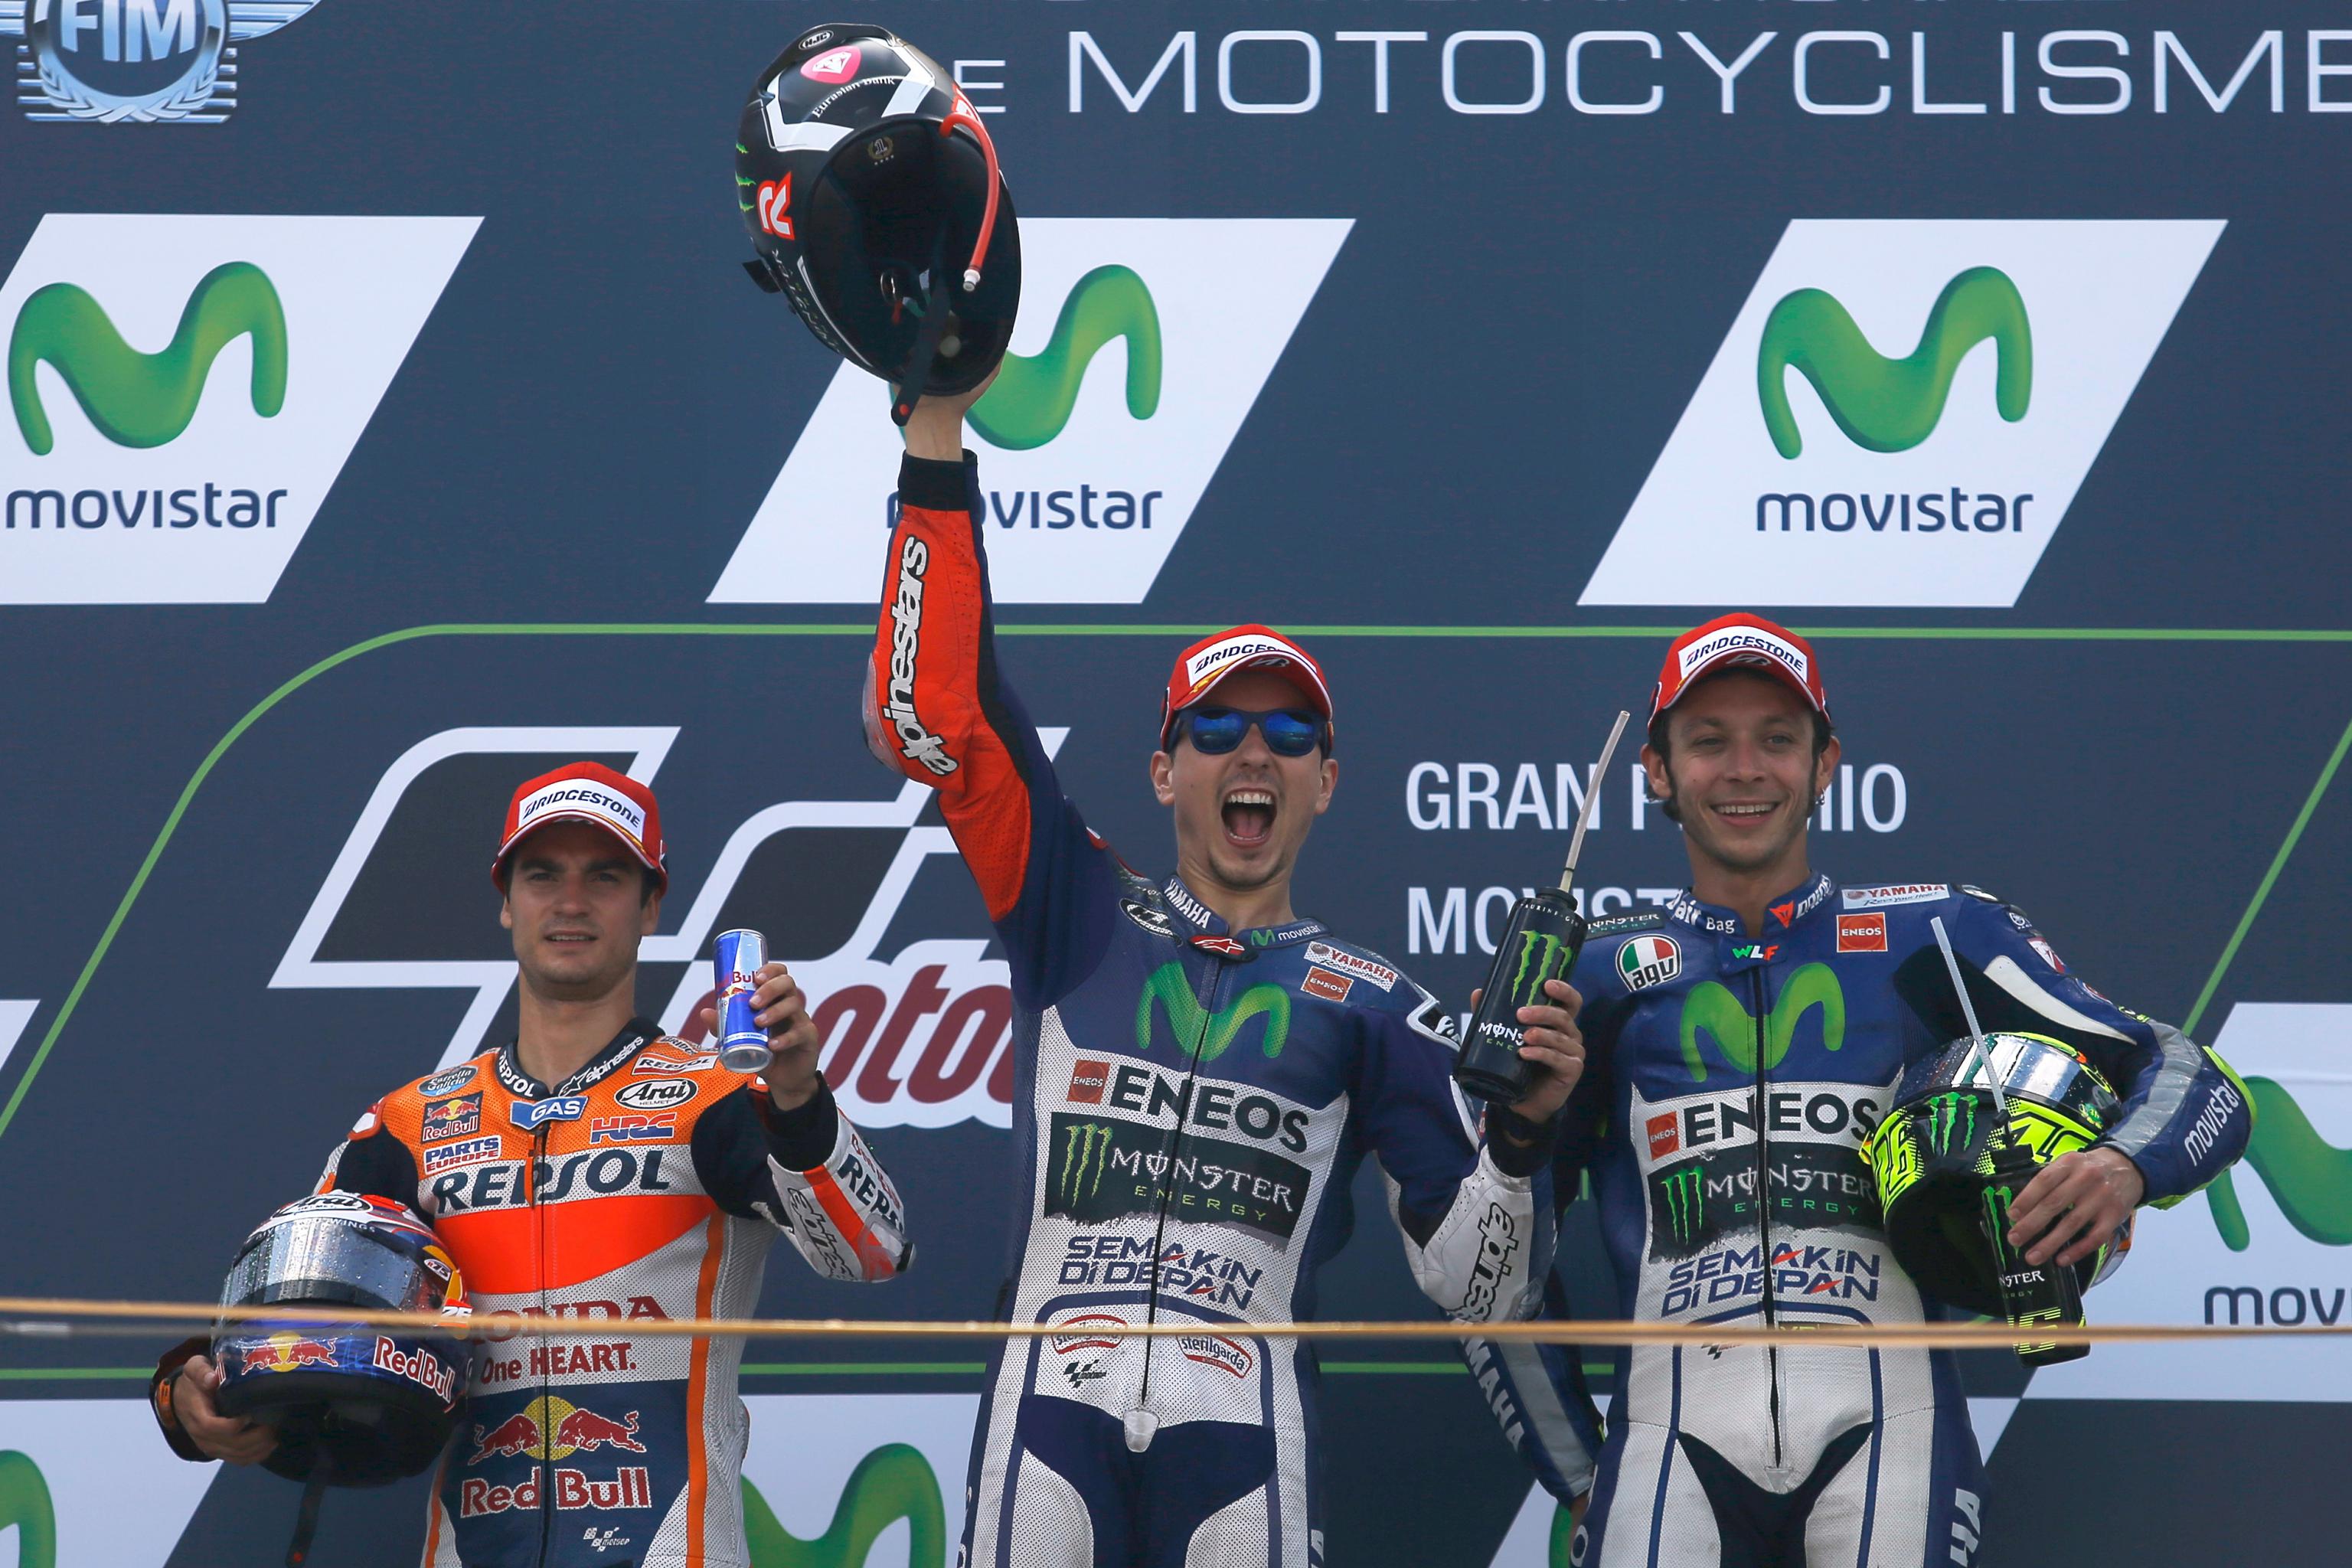 Motogp Aragon Grand Prix 15 Results Winner Standings And Reaction Bleacher Report Latest News Videos And Highlights